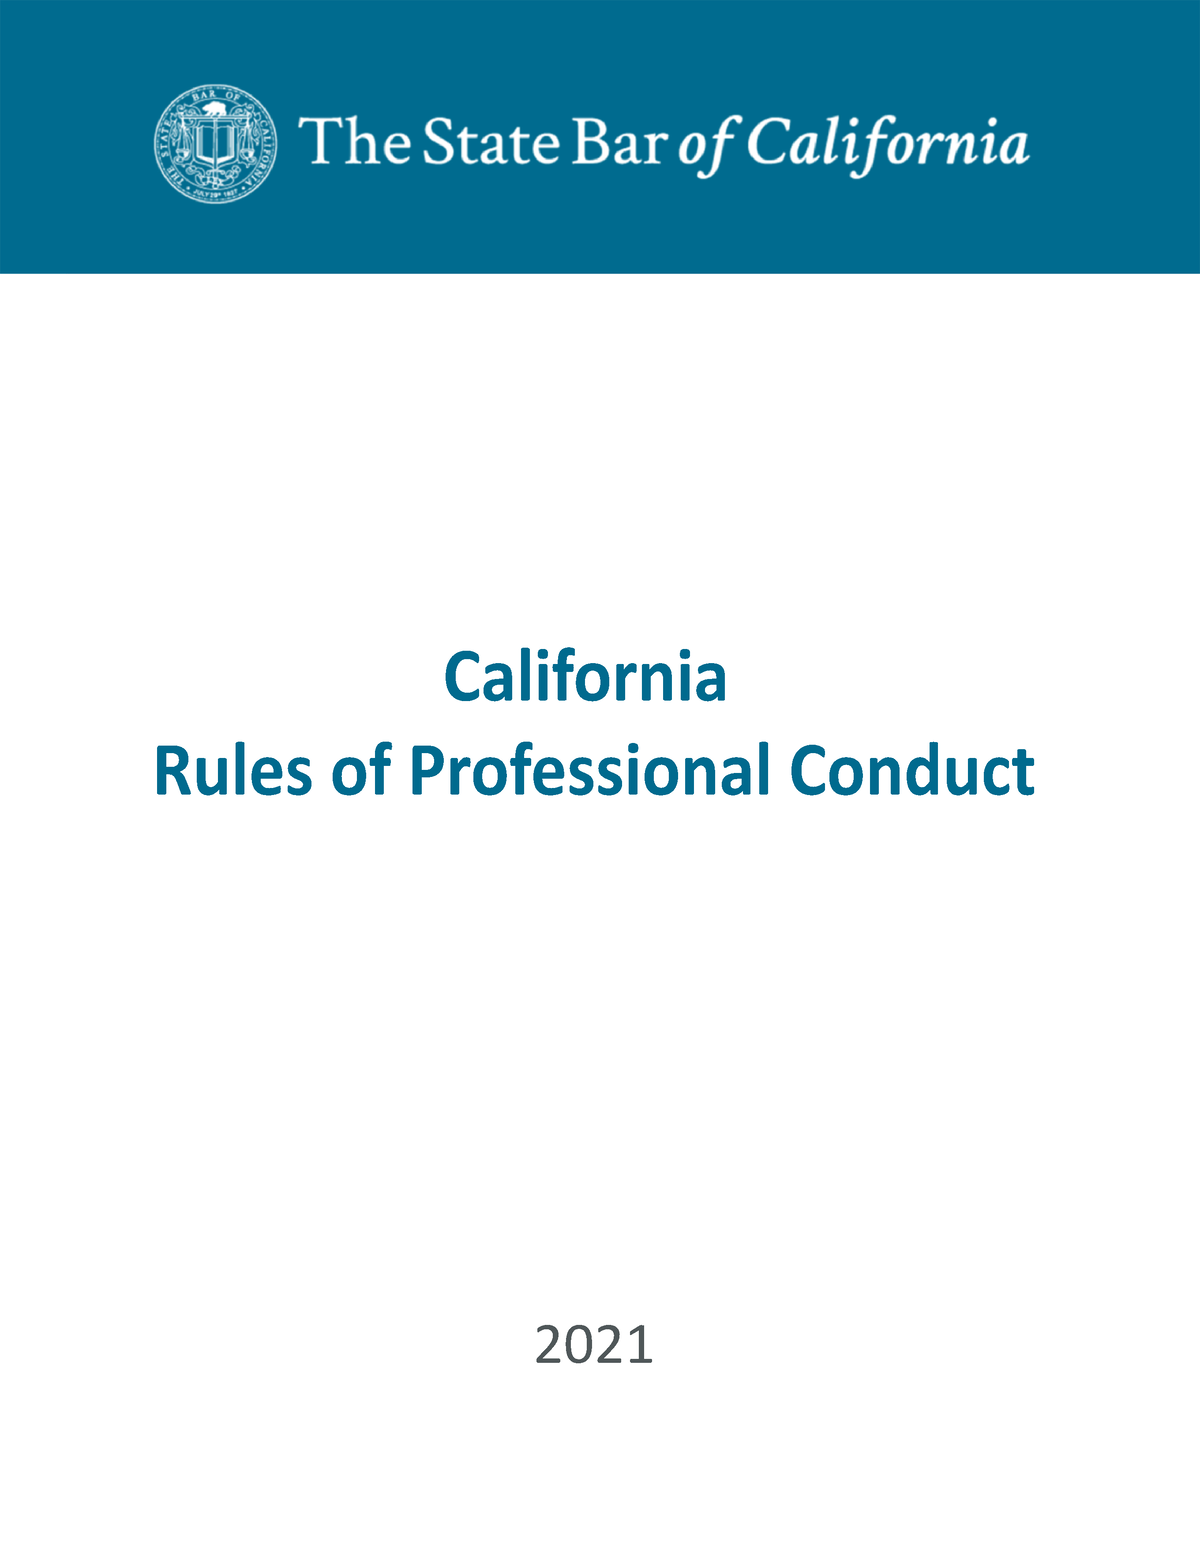 Rules of Professional Conduct 0 Terminology 2 CHAPTER 1. LAWYER